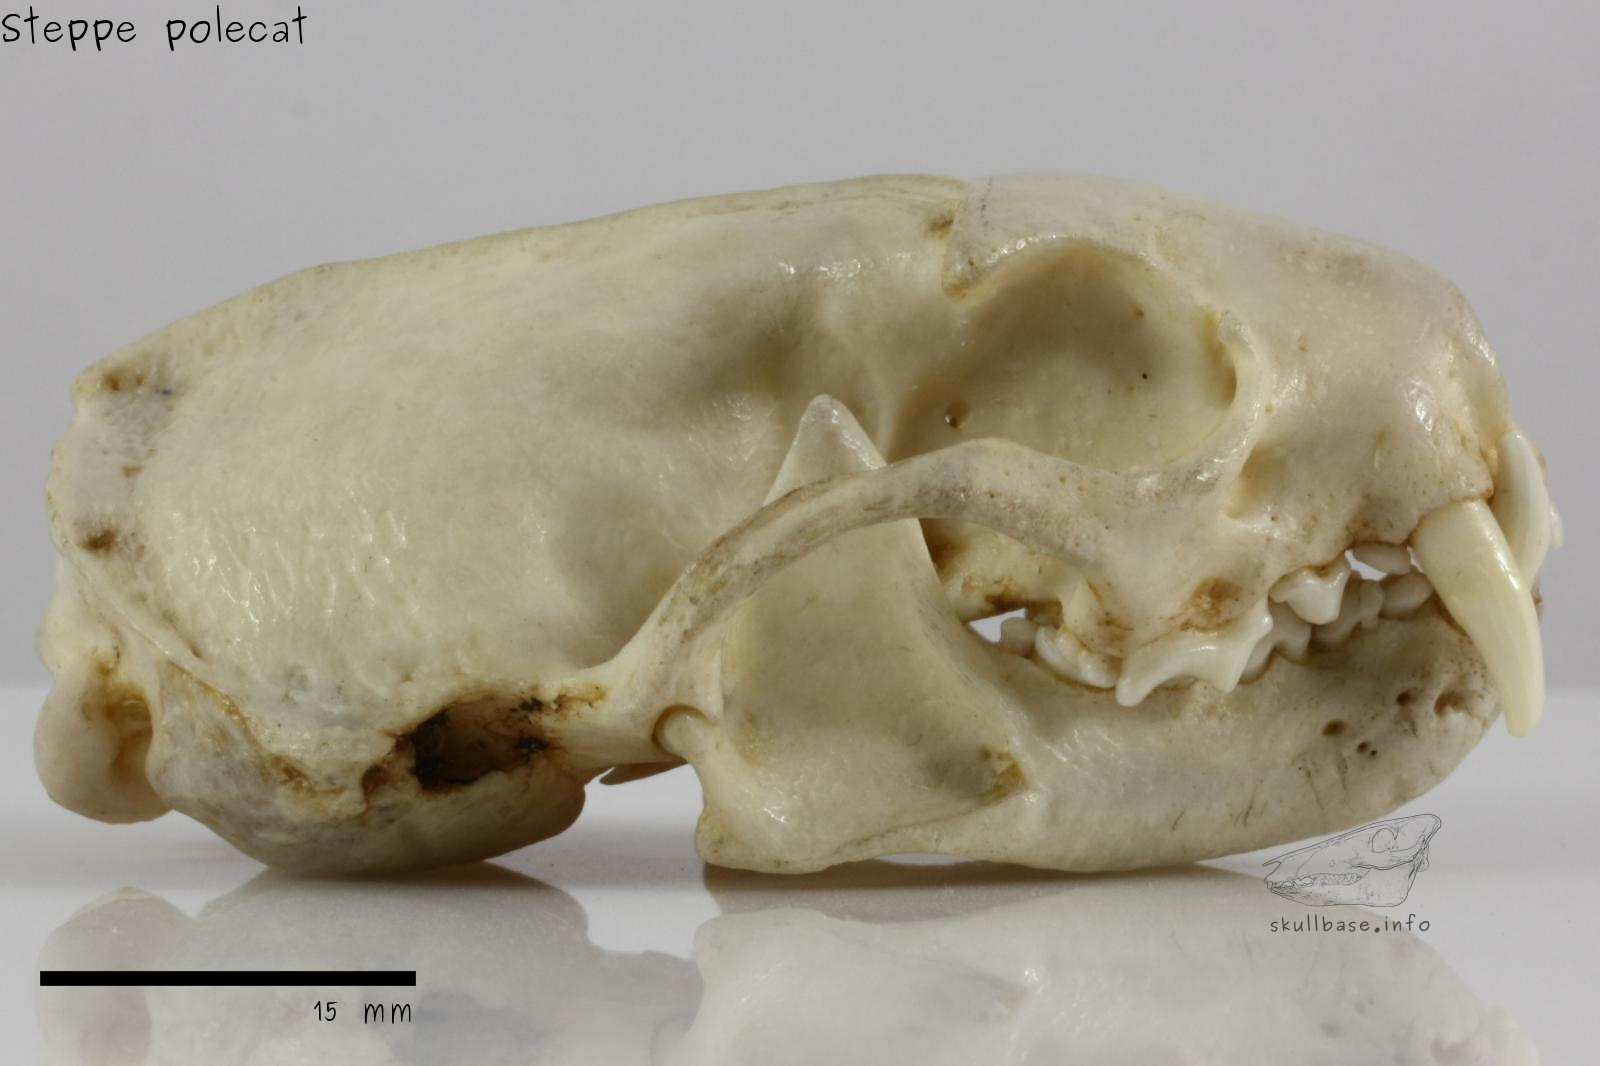 Steppe polecat (Mustela eversmanii) skull lateral view